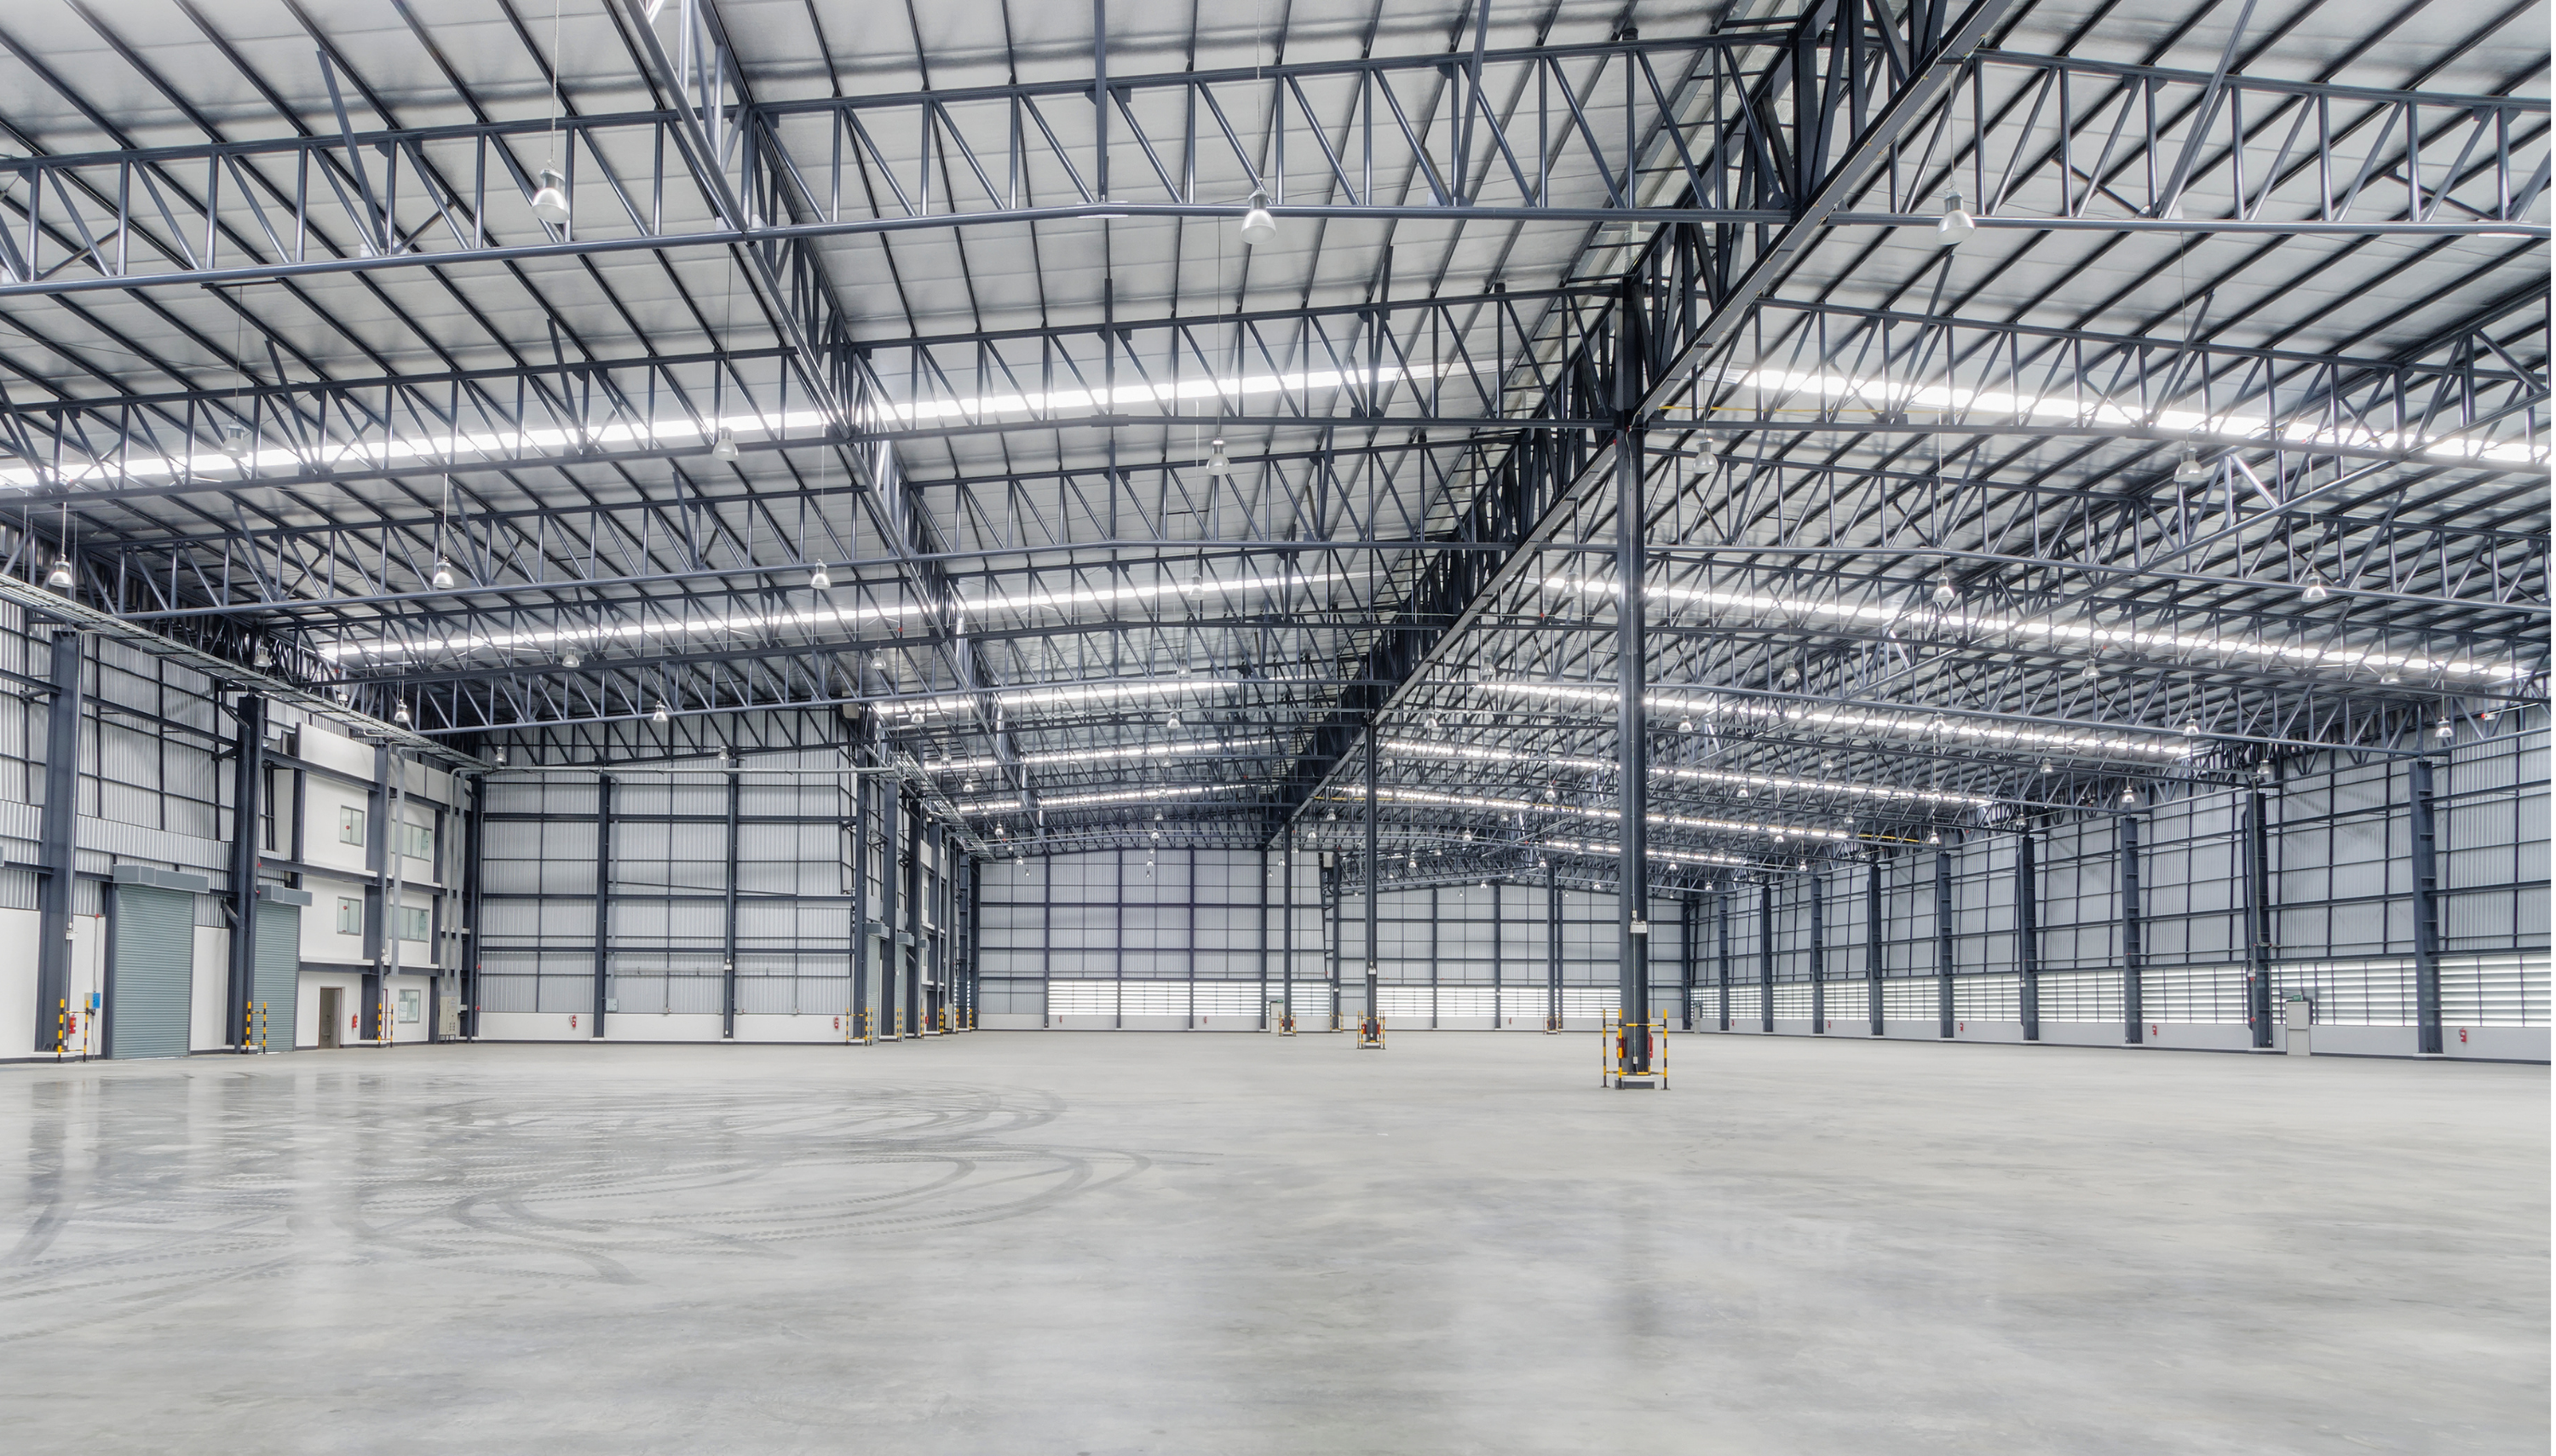 10 Questions to Ask When Hiring a Commercial & Industrial Painting Contractor